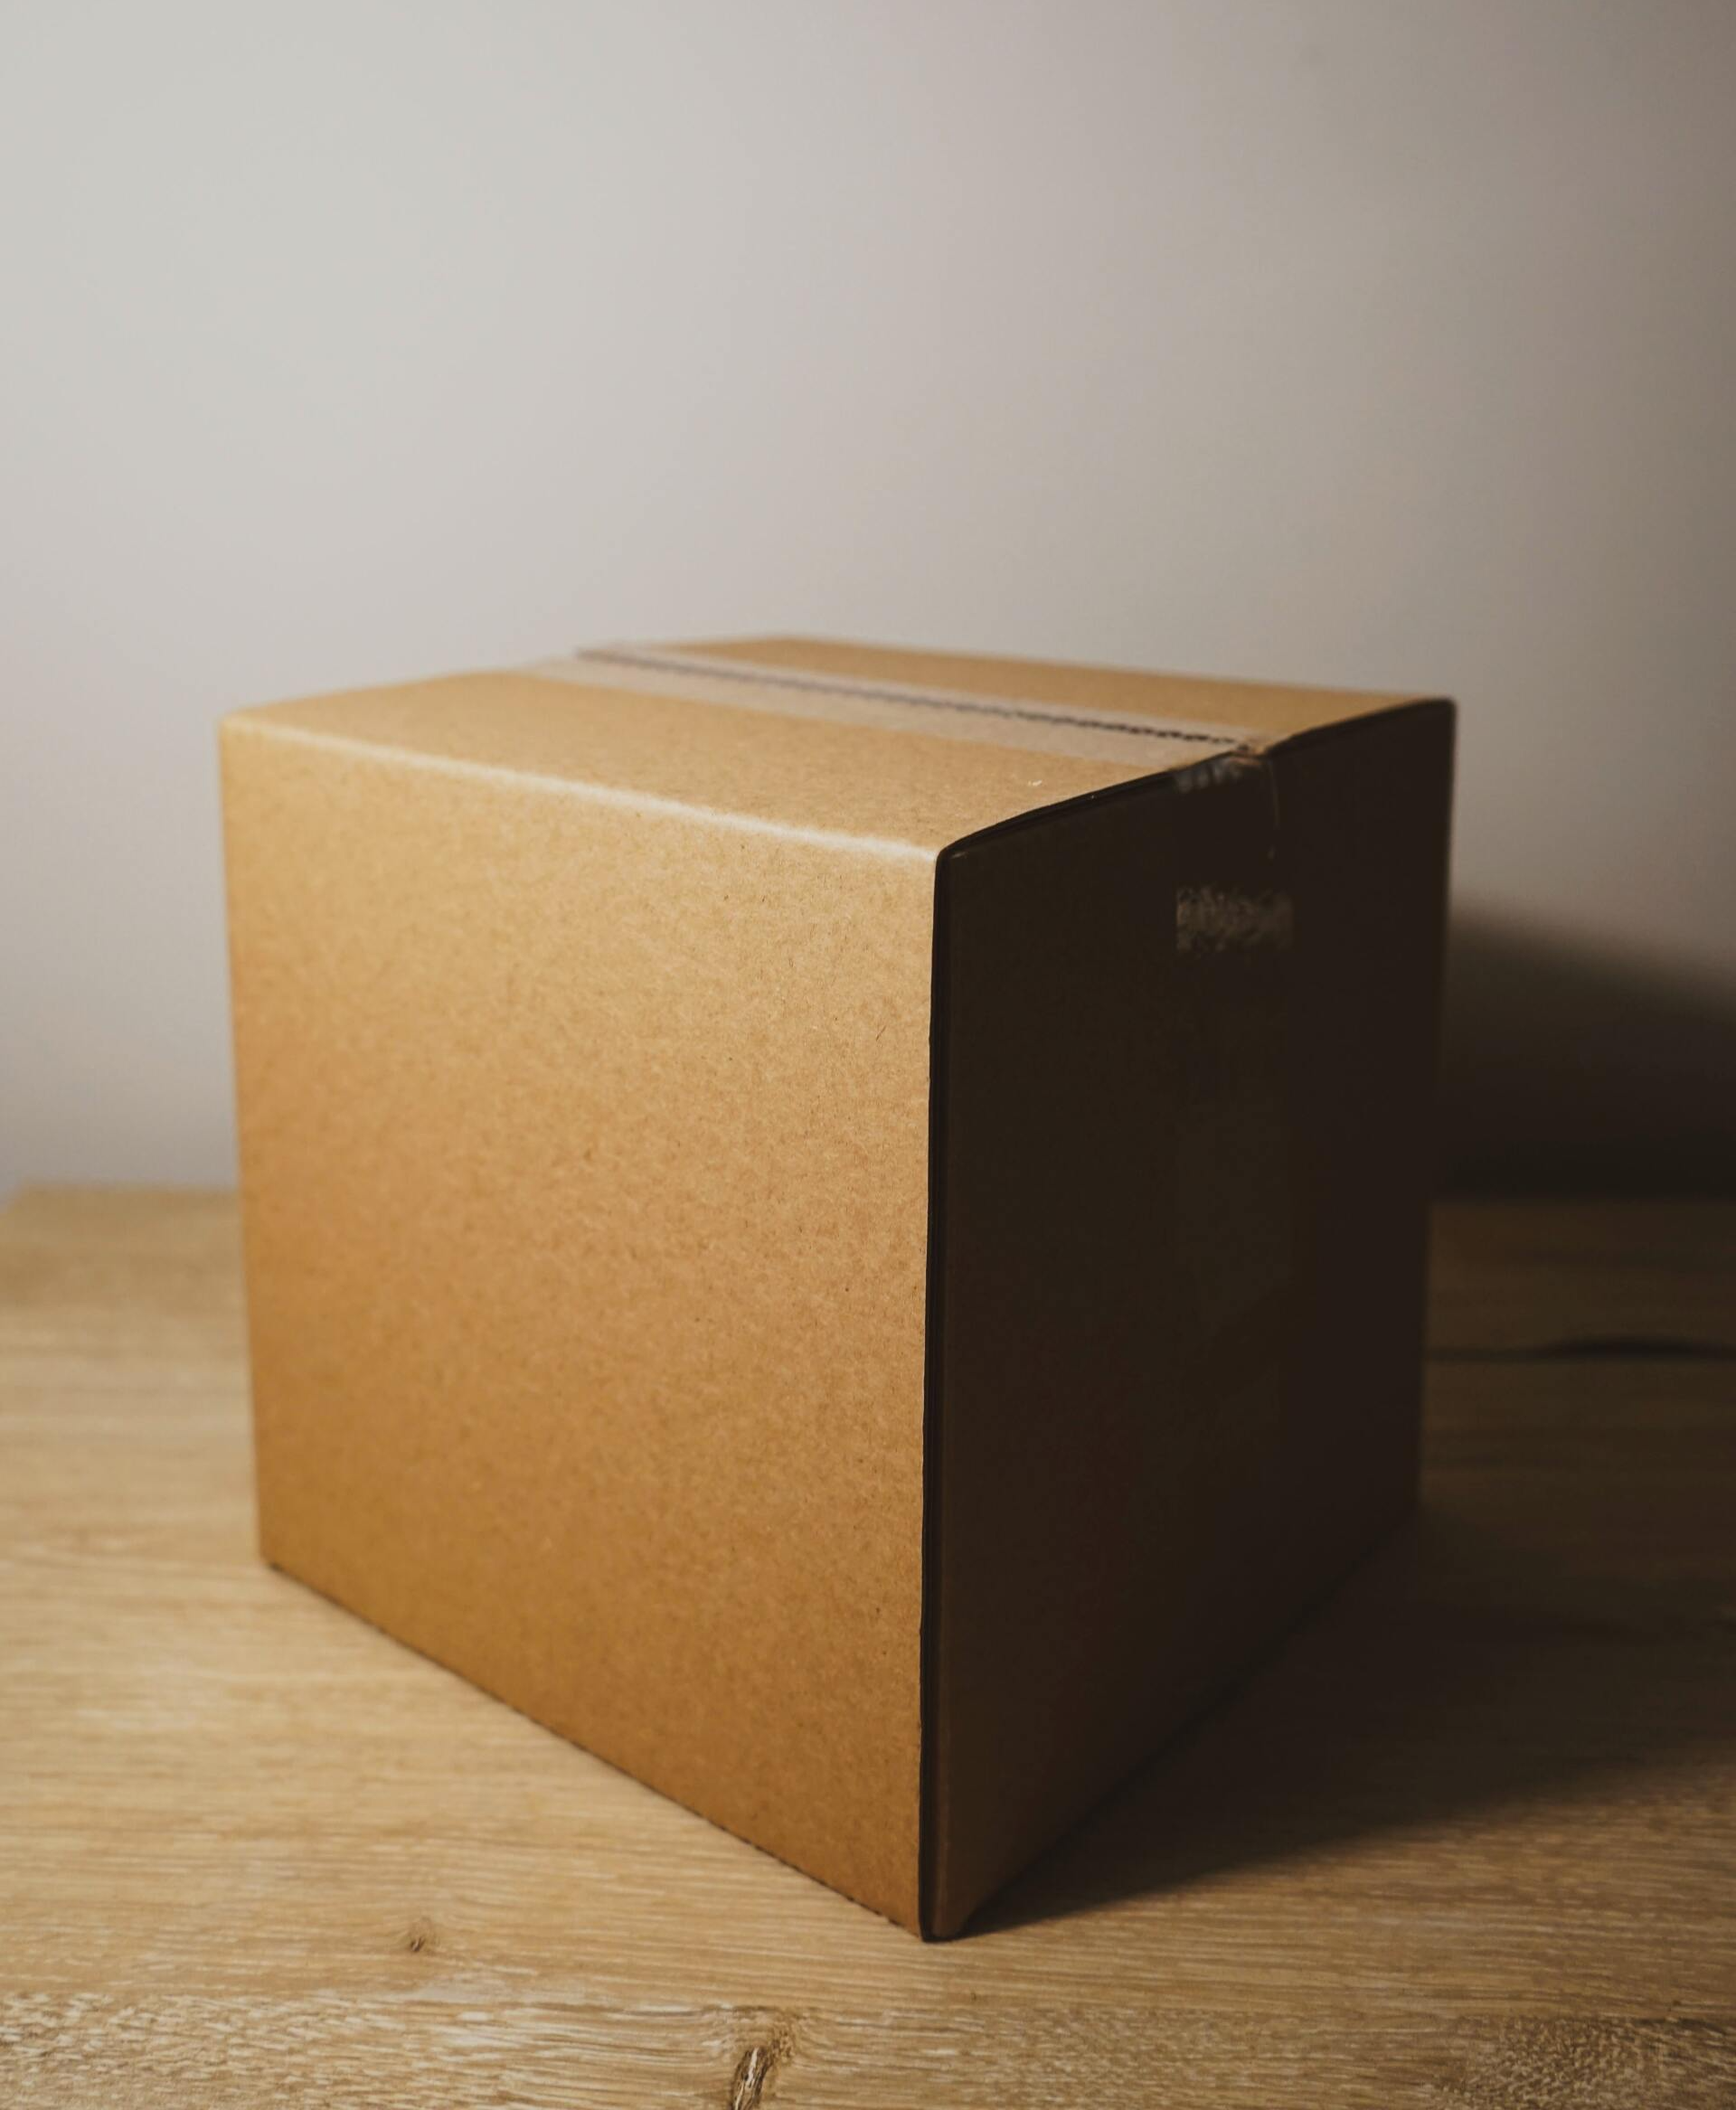 Brandable packaging with corrugated boxes